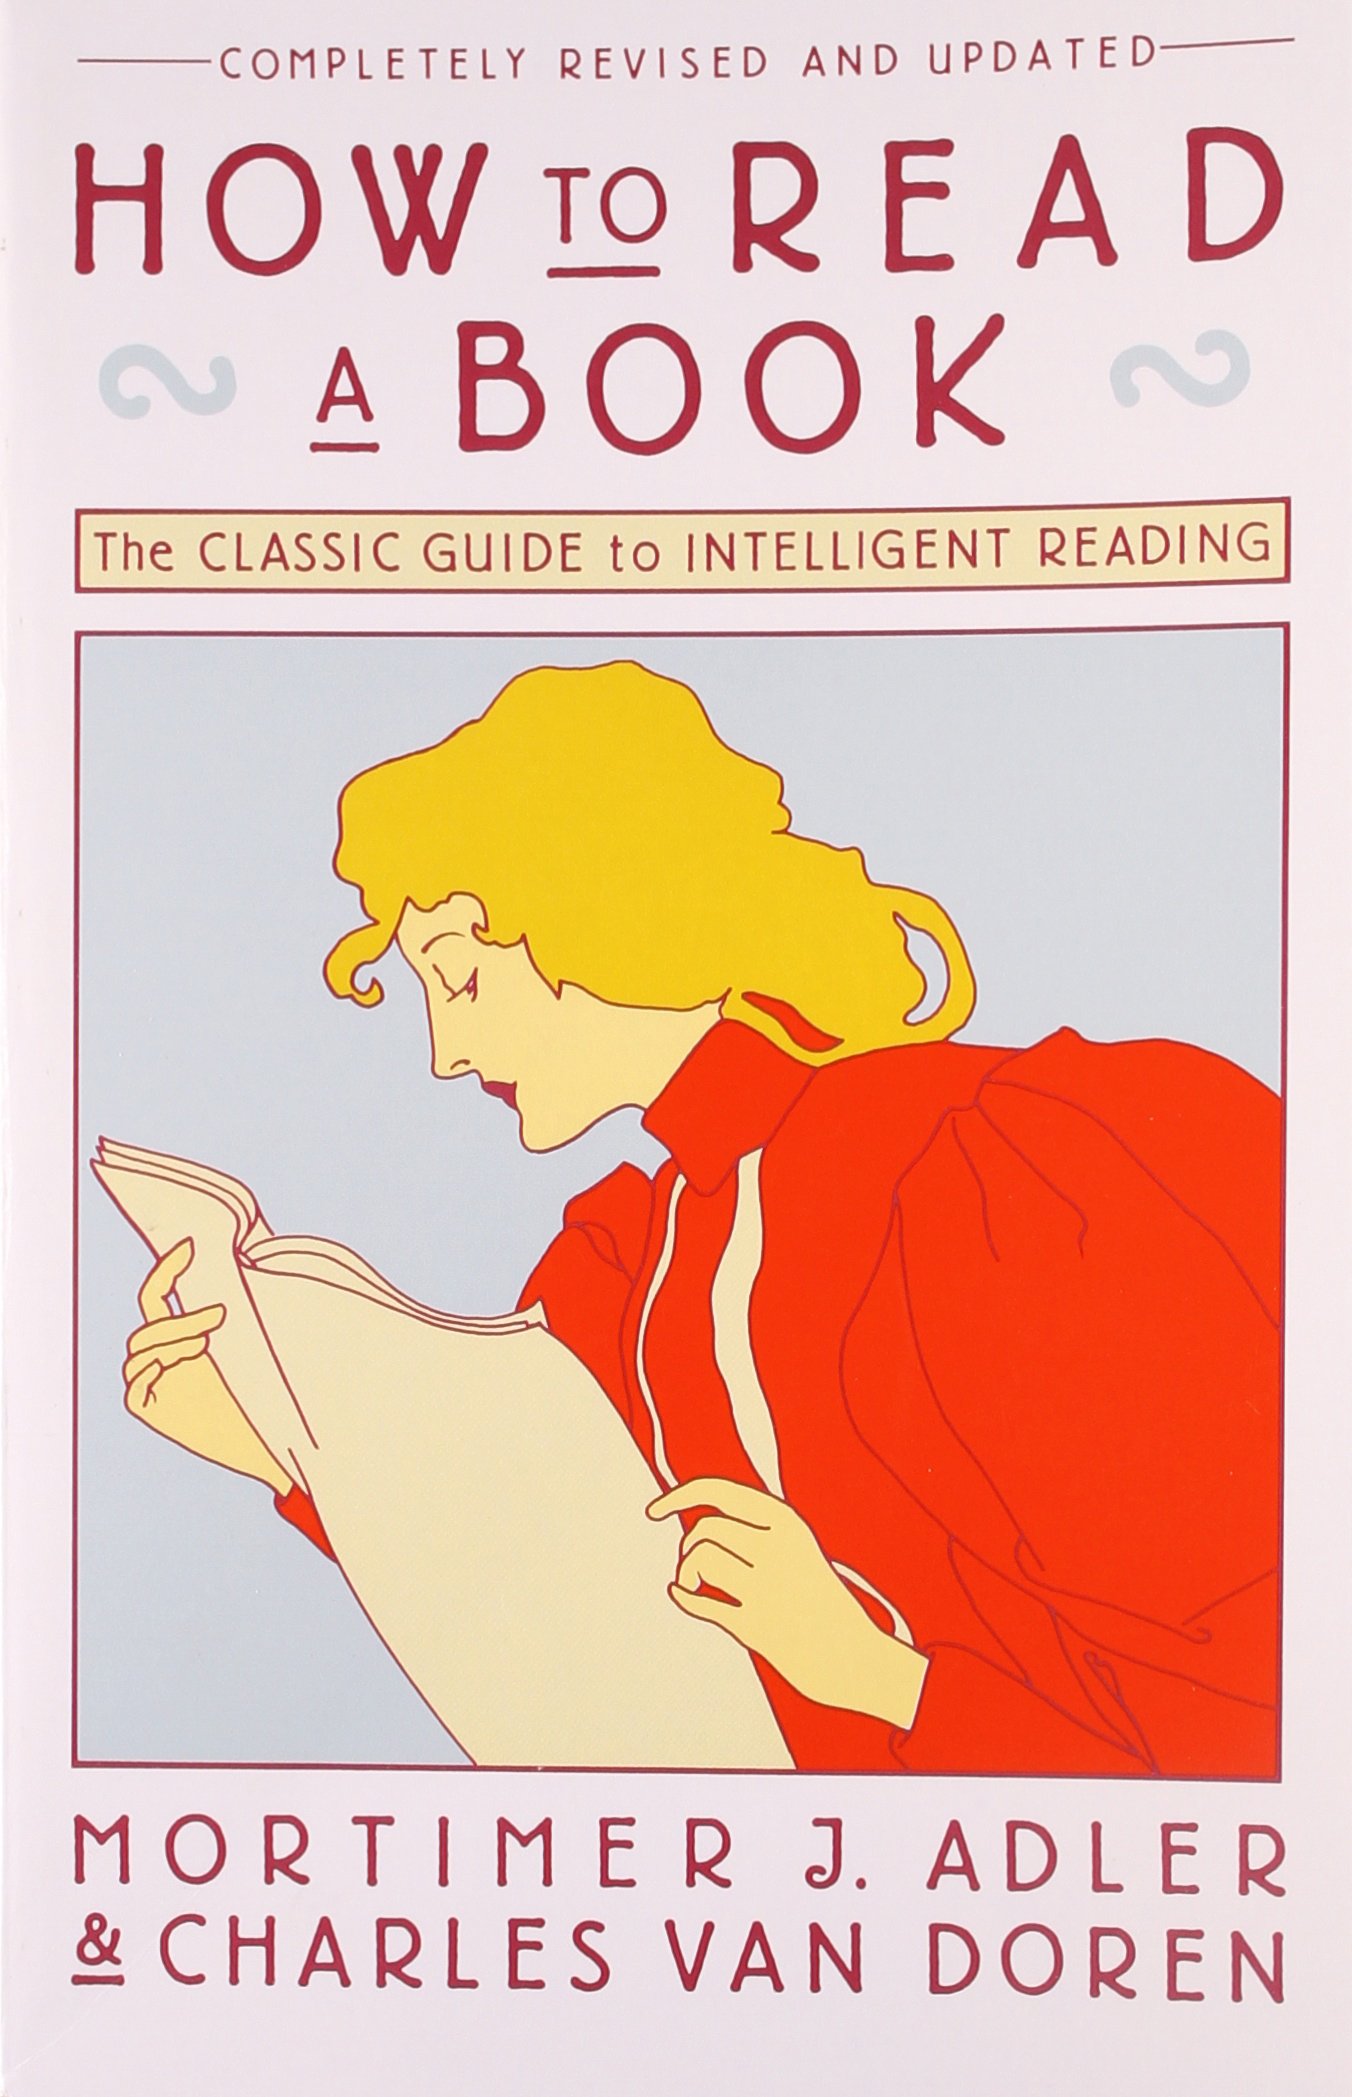 How To Read a Book Cover page